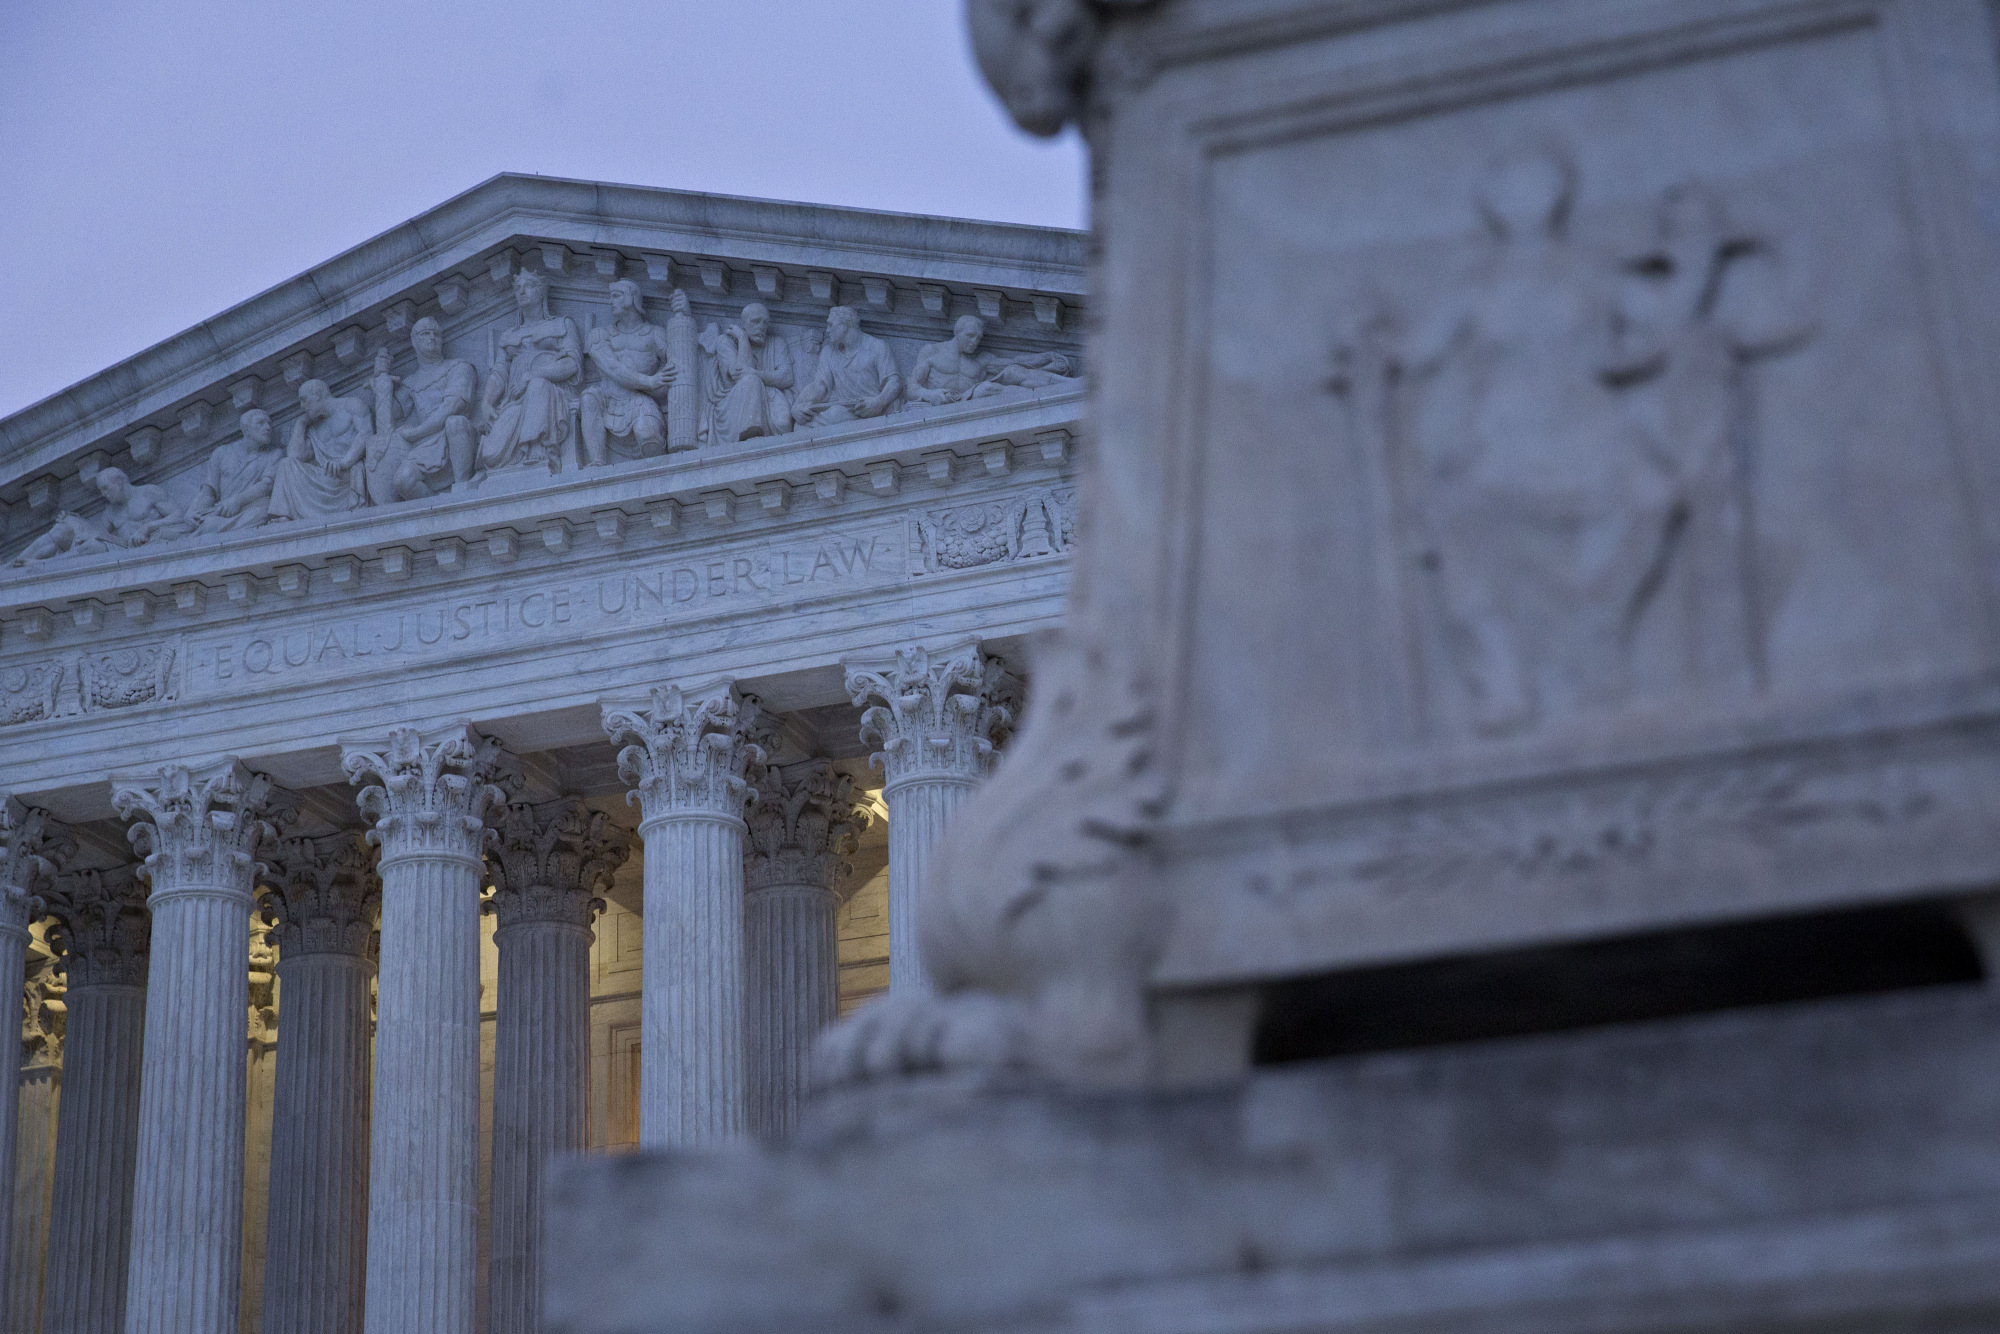 The U.S. Supreme Court building stands in Washington.